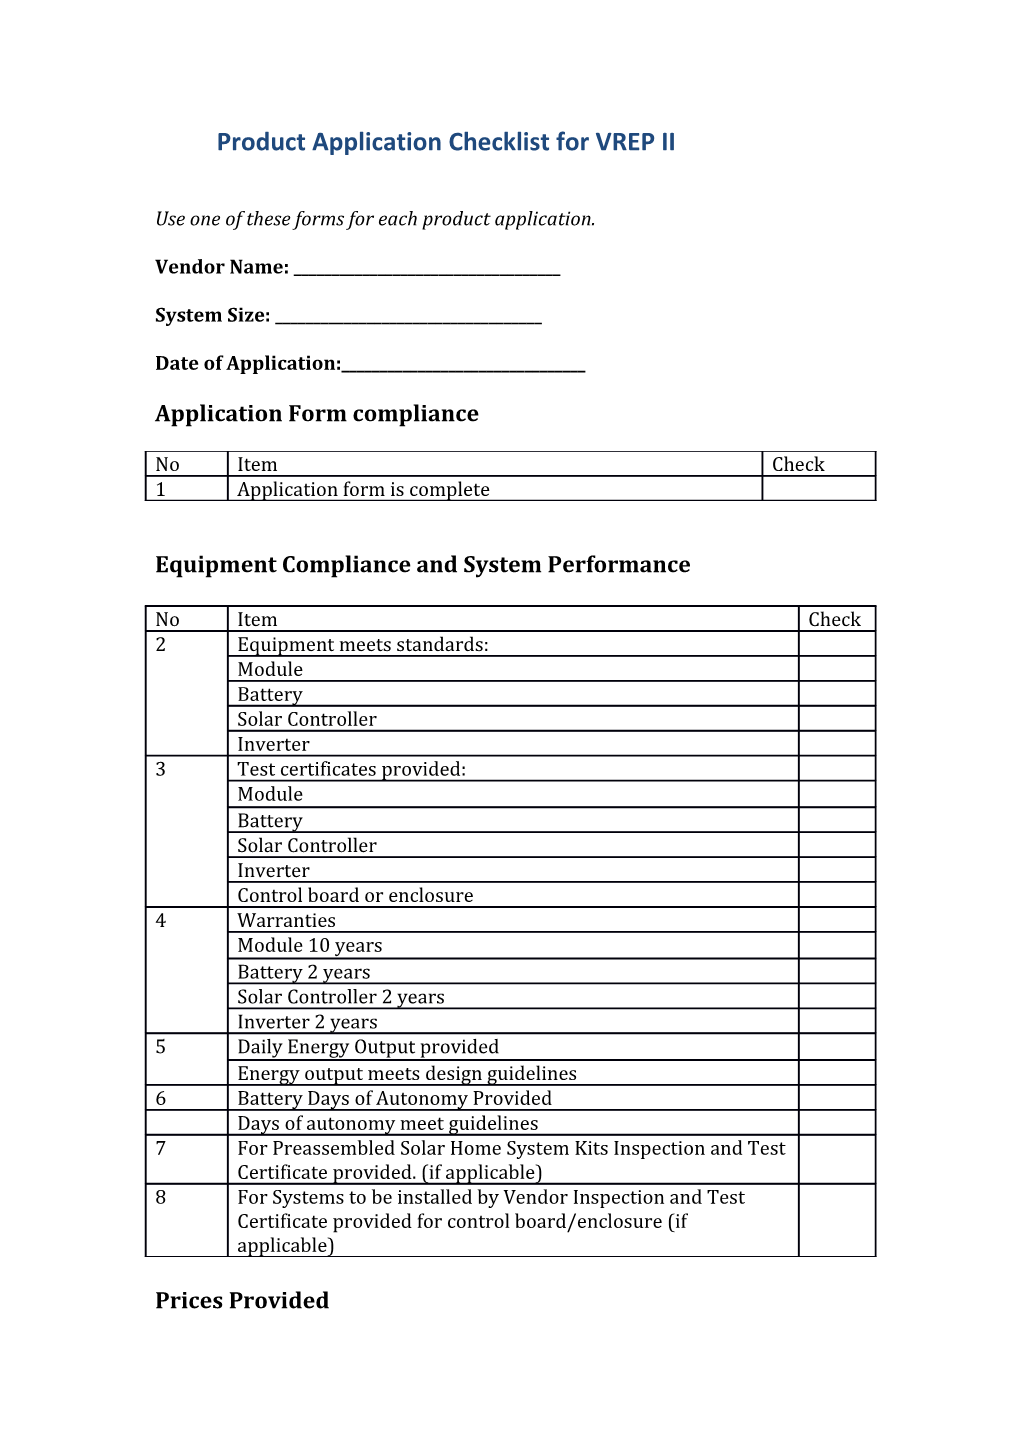 Product Application Checklist for VREP II